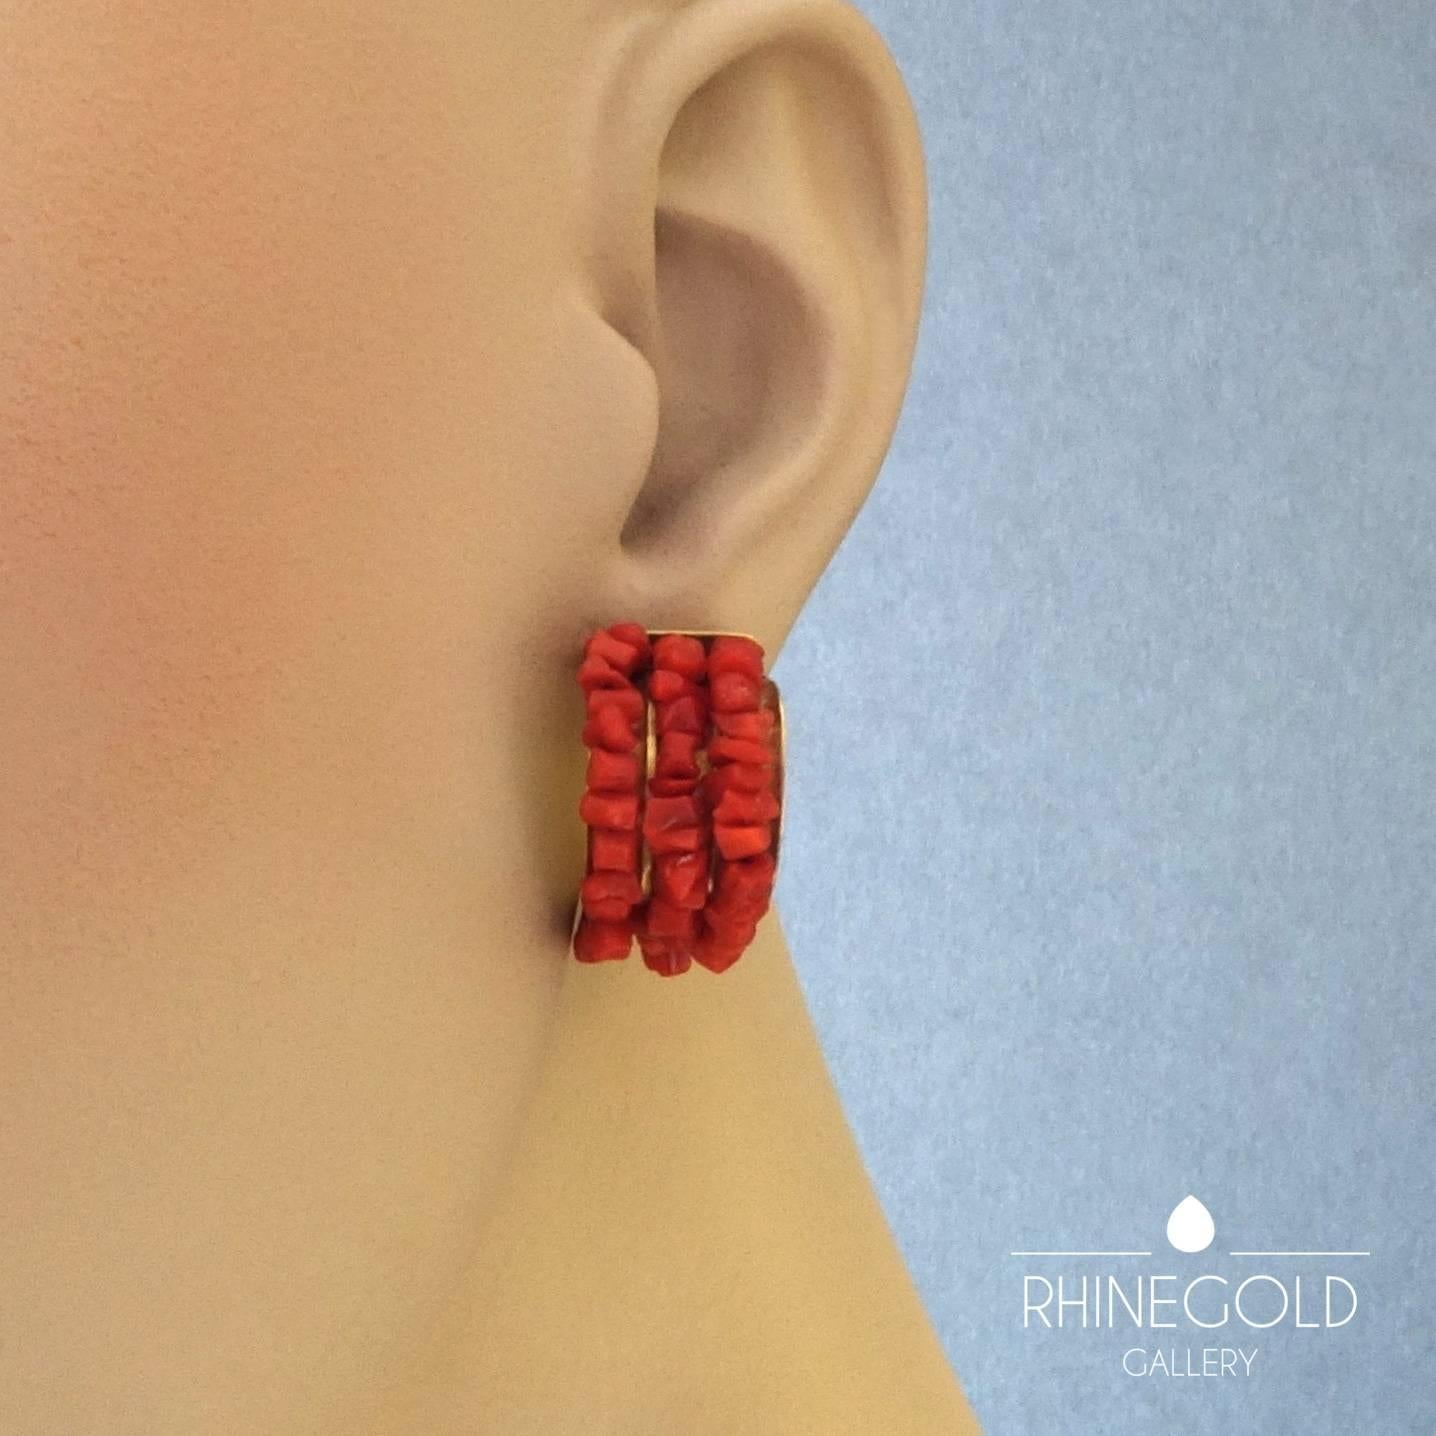 Sabine Strobel Natural Coral Gold Half Hoop Clip-on Earrings
18k yellow gold, natural coral
Height 2.3 cm, width 1.3 cm (approx. 7/8” by 1/2”), depth 1.5 cm (approx. 5/8”)
Weight approx. 10.7 grams
Marks: gold content mark ‘750’ for 18k gold;